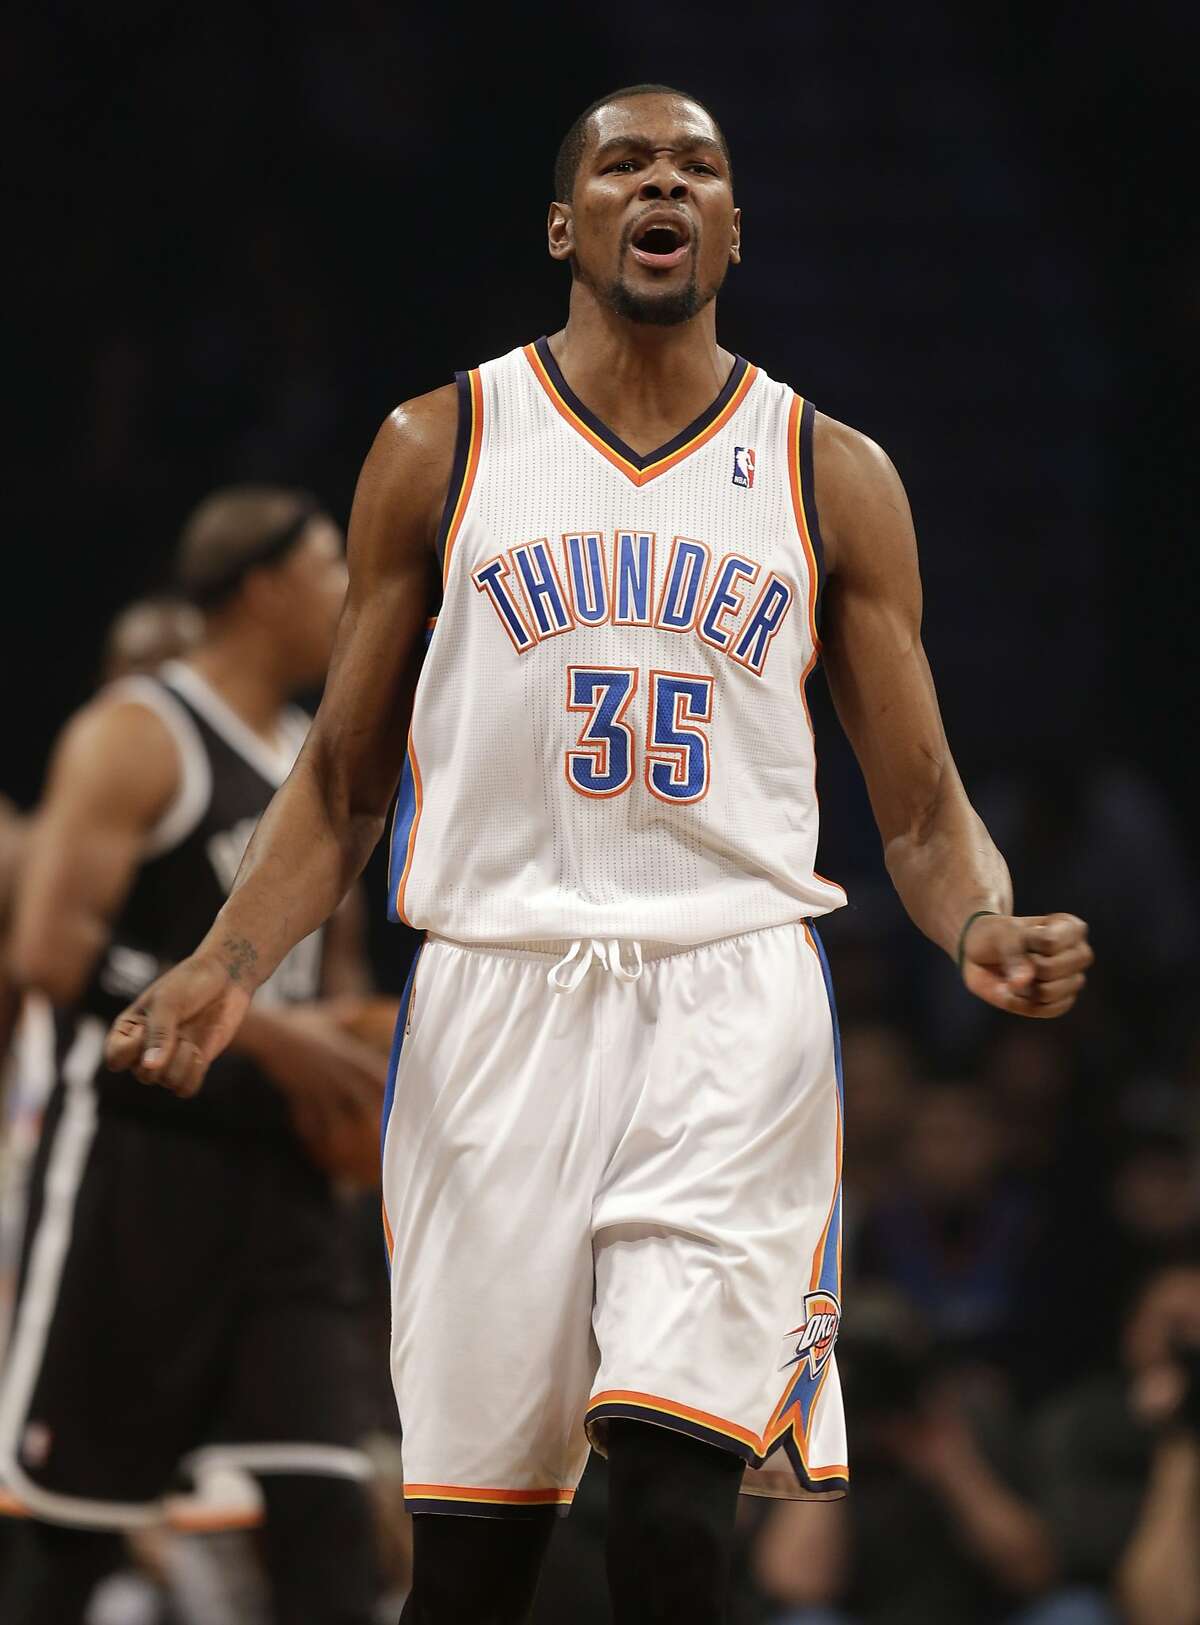 Oklahoma City Thunder's Kevin Durant reacts during the first half of the NBA basketball game at the Barclays Center, Friday, Jan. 31, 2014, in New York. (AP Photo/Seth Wenig)